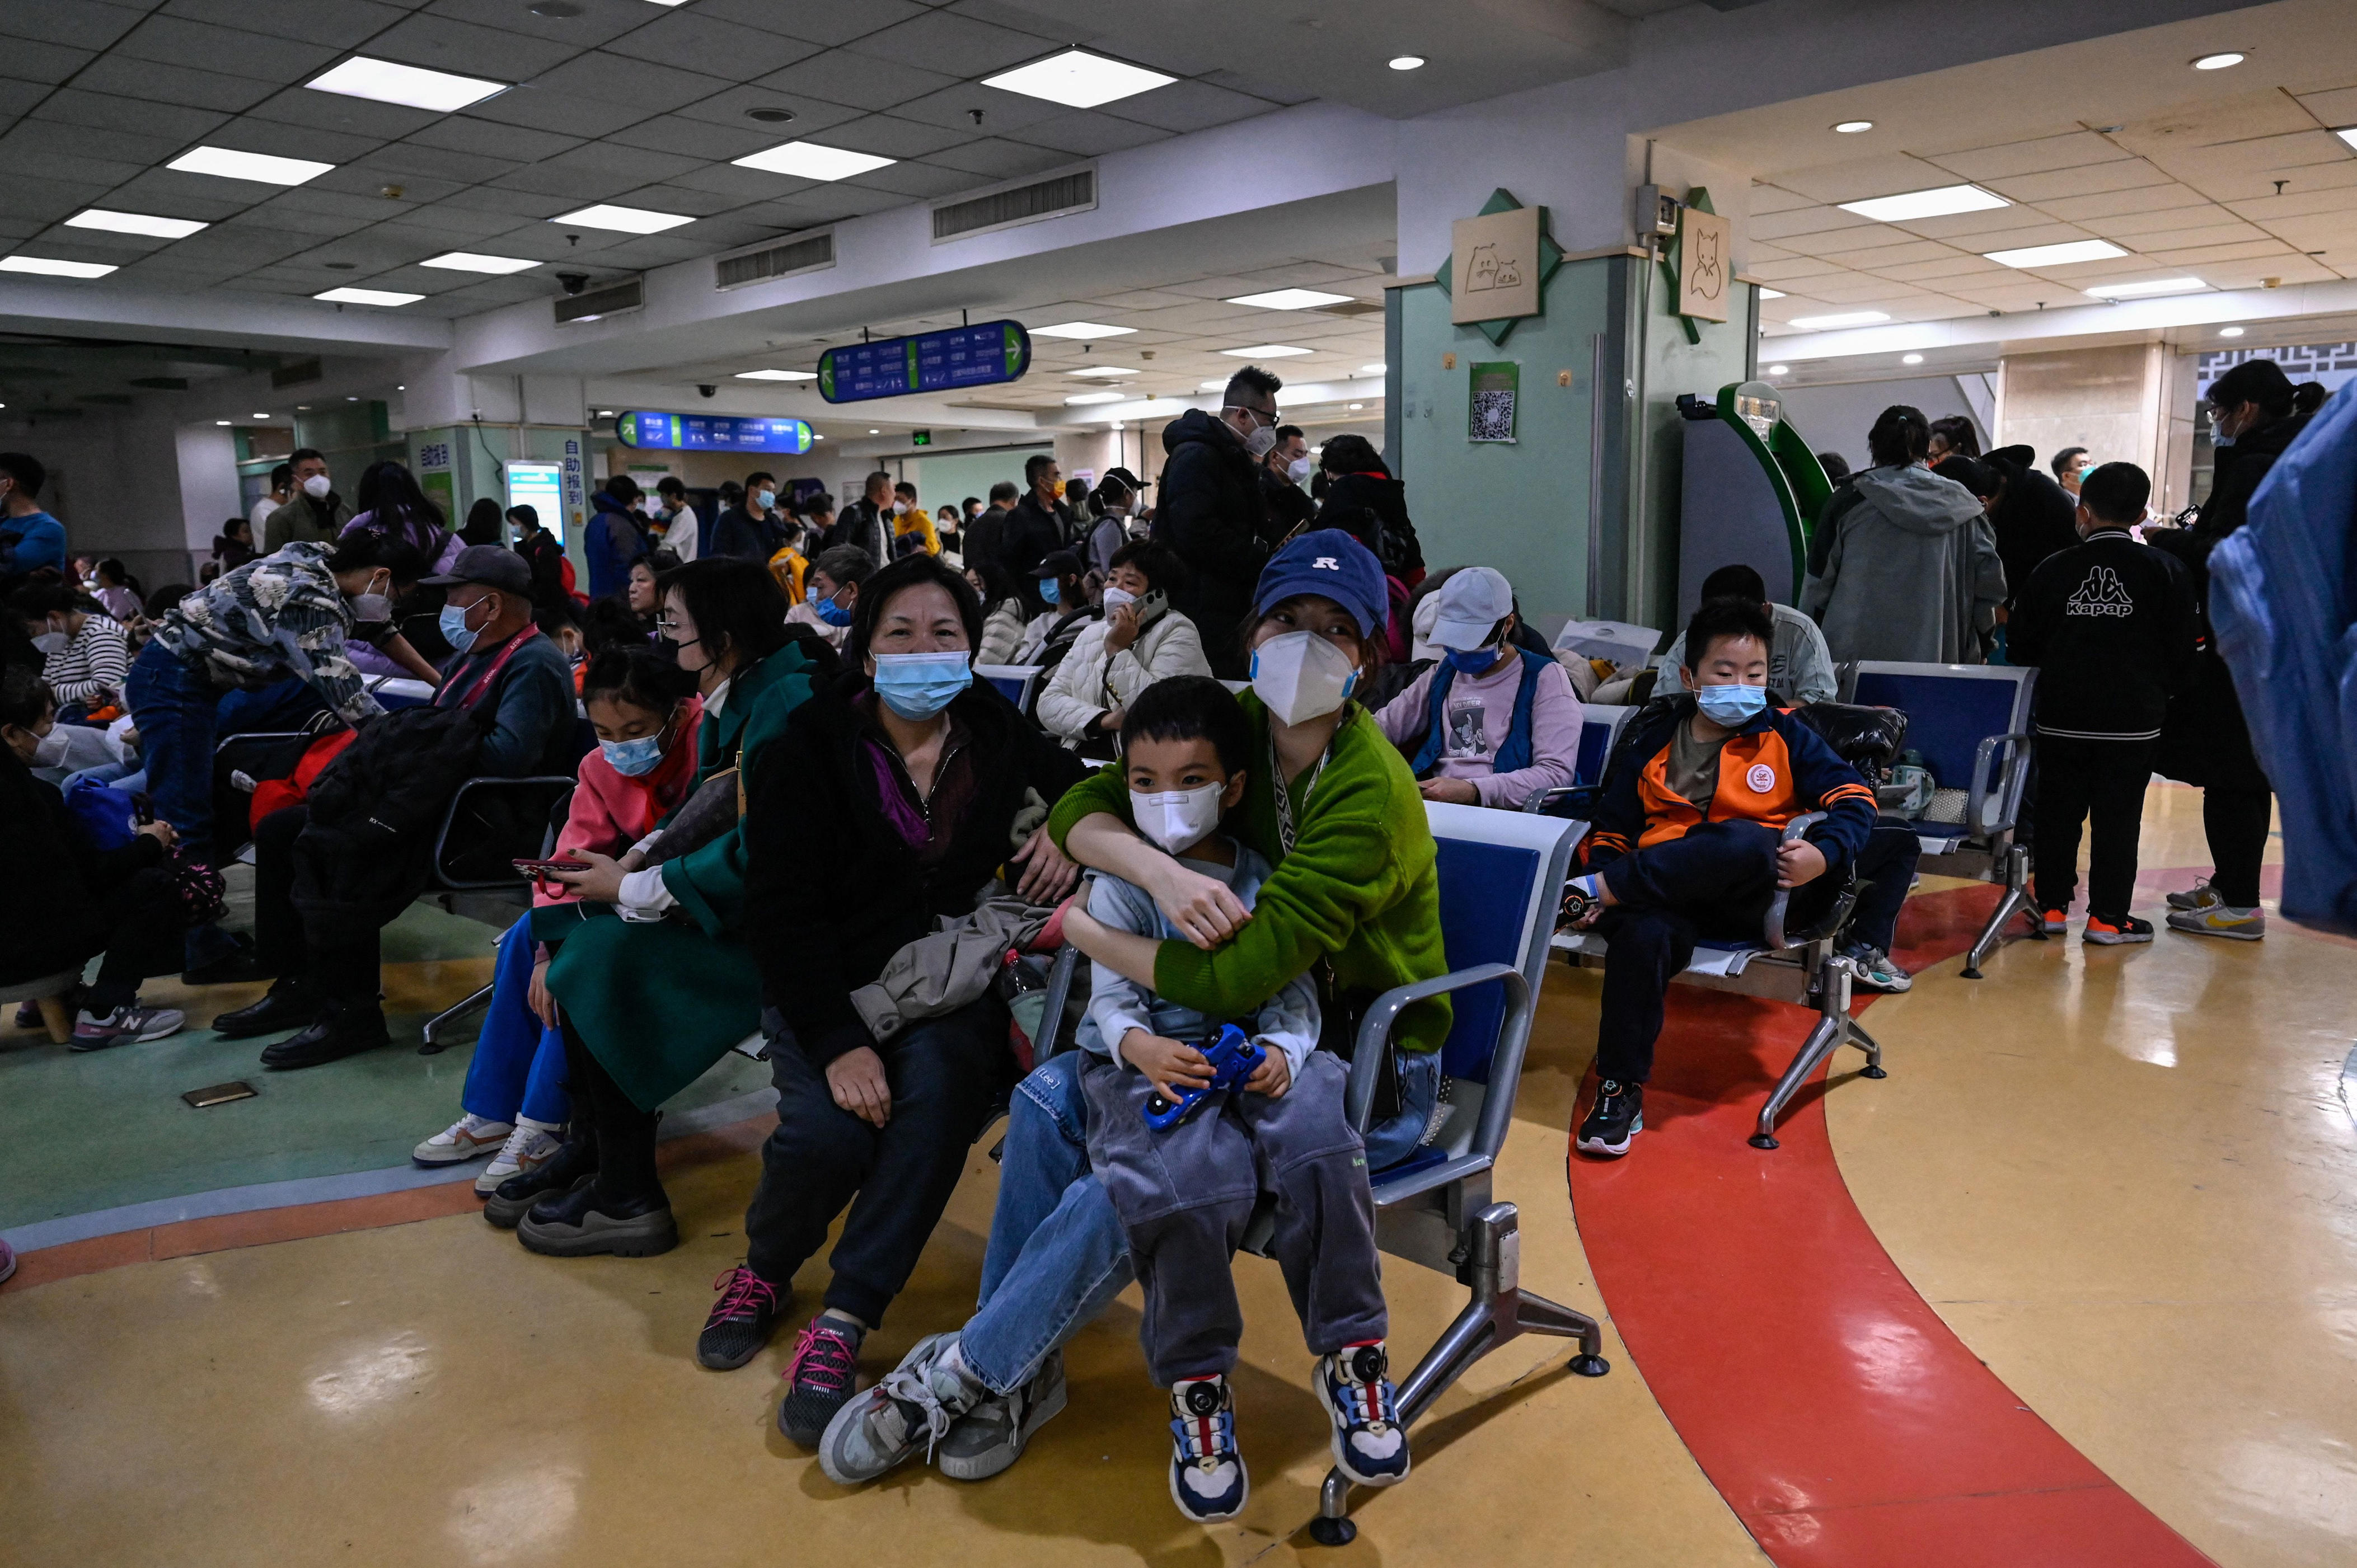 so many kids are falling sick in china that a children's hospital said it saw 13,000 cases in a single day